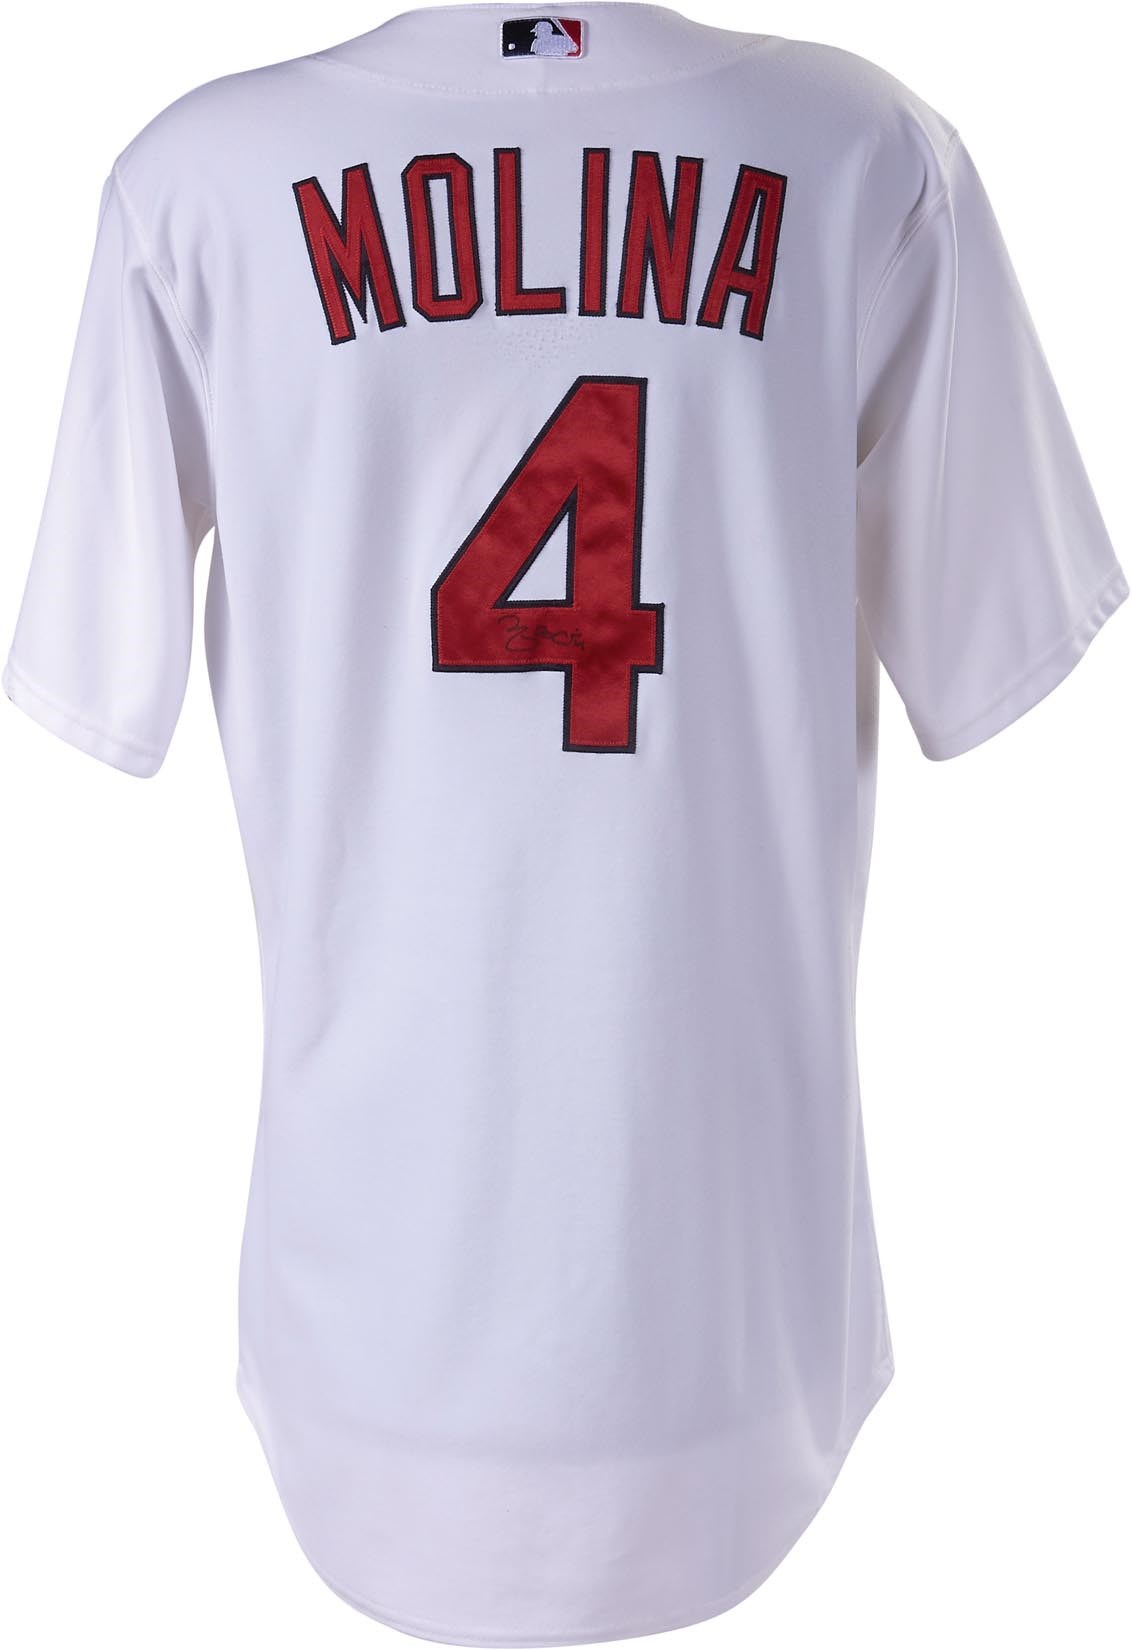 - 2015 Yadier Molina Opening Day Home Run #1 Signed Game Worn Jersey (PSA, MLB Auth. & Photo-Matched)